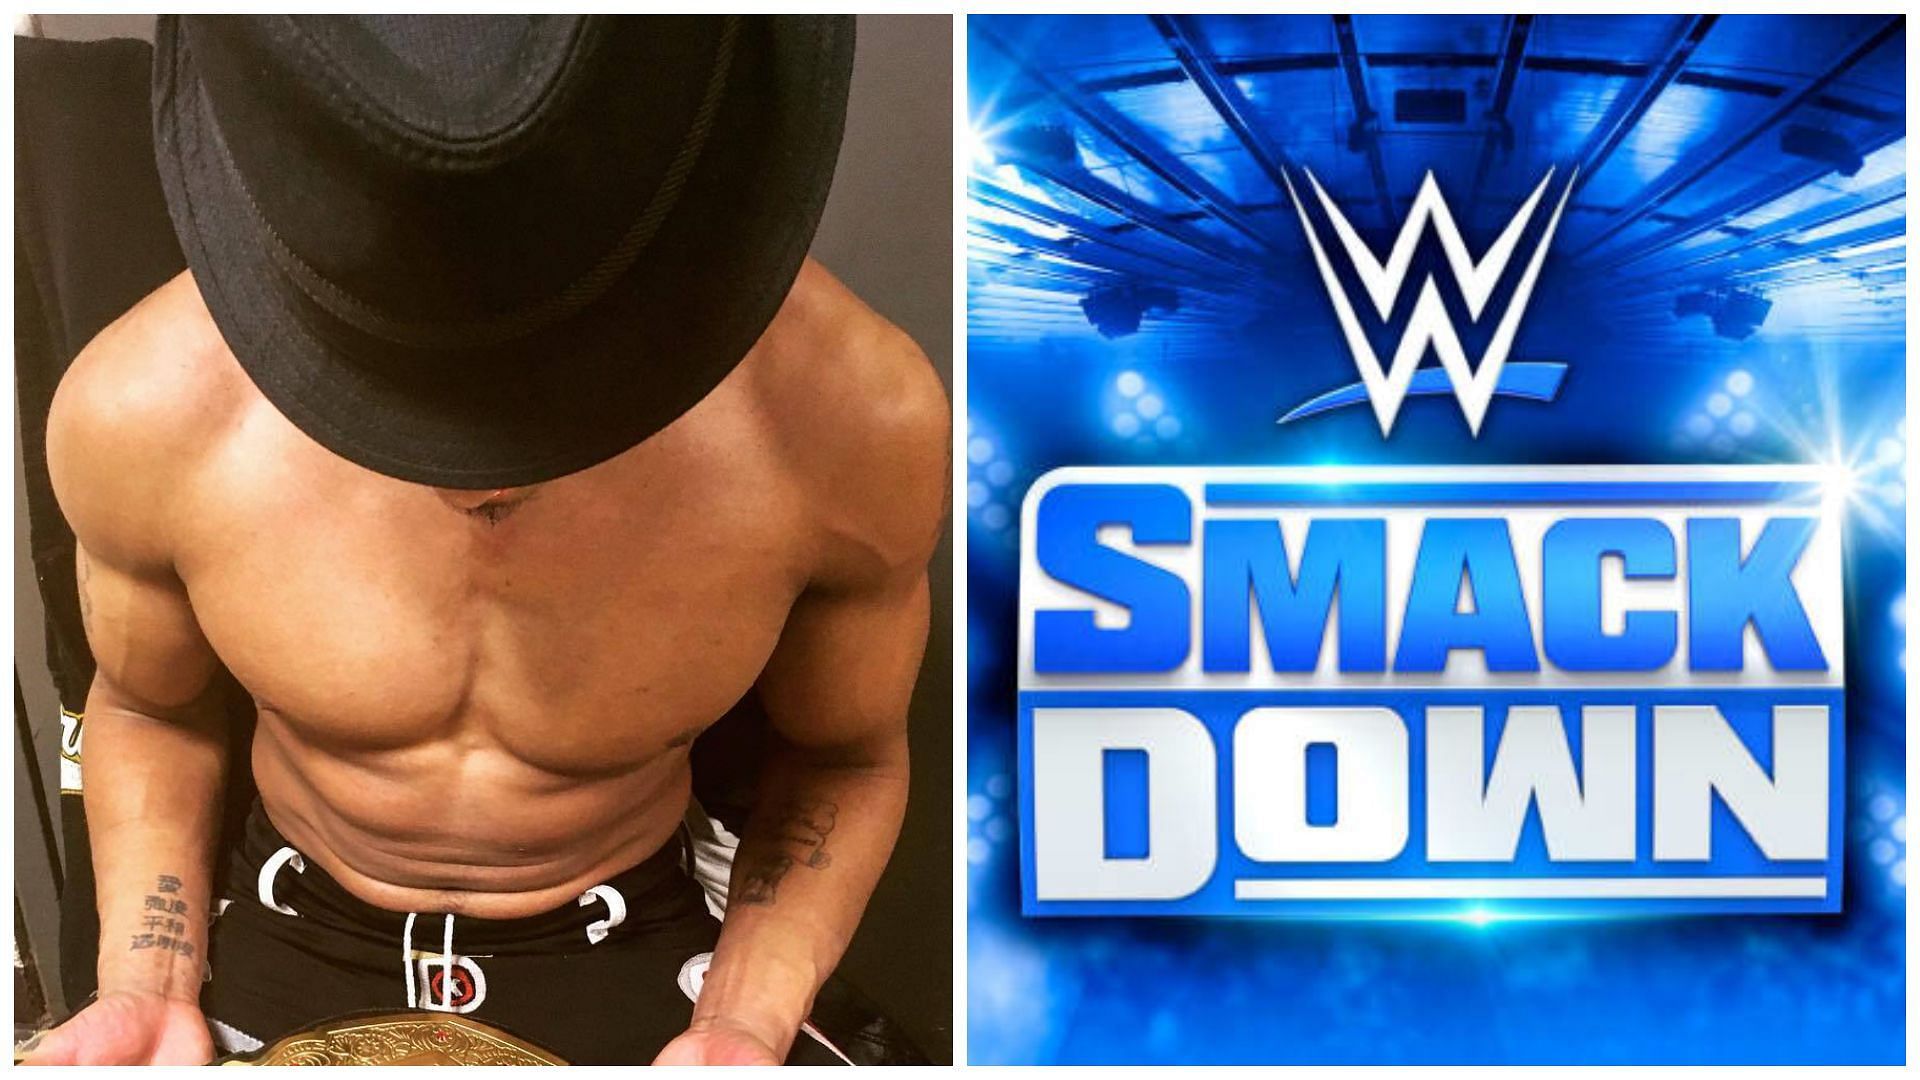 A major WWE star is set to make SmackDown debut.